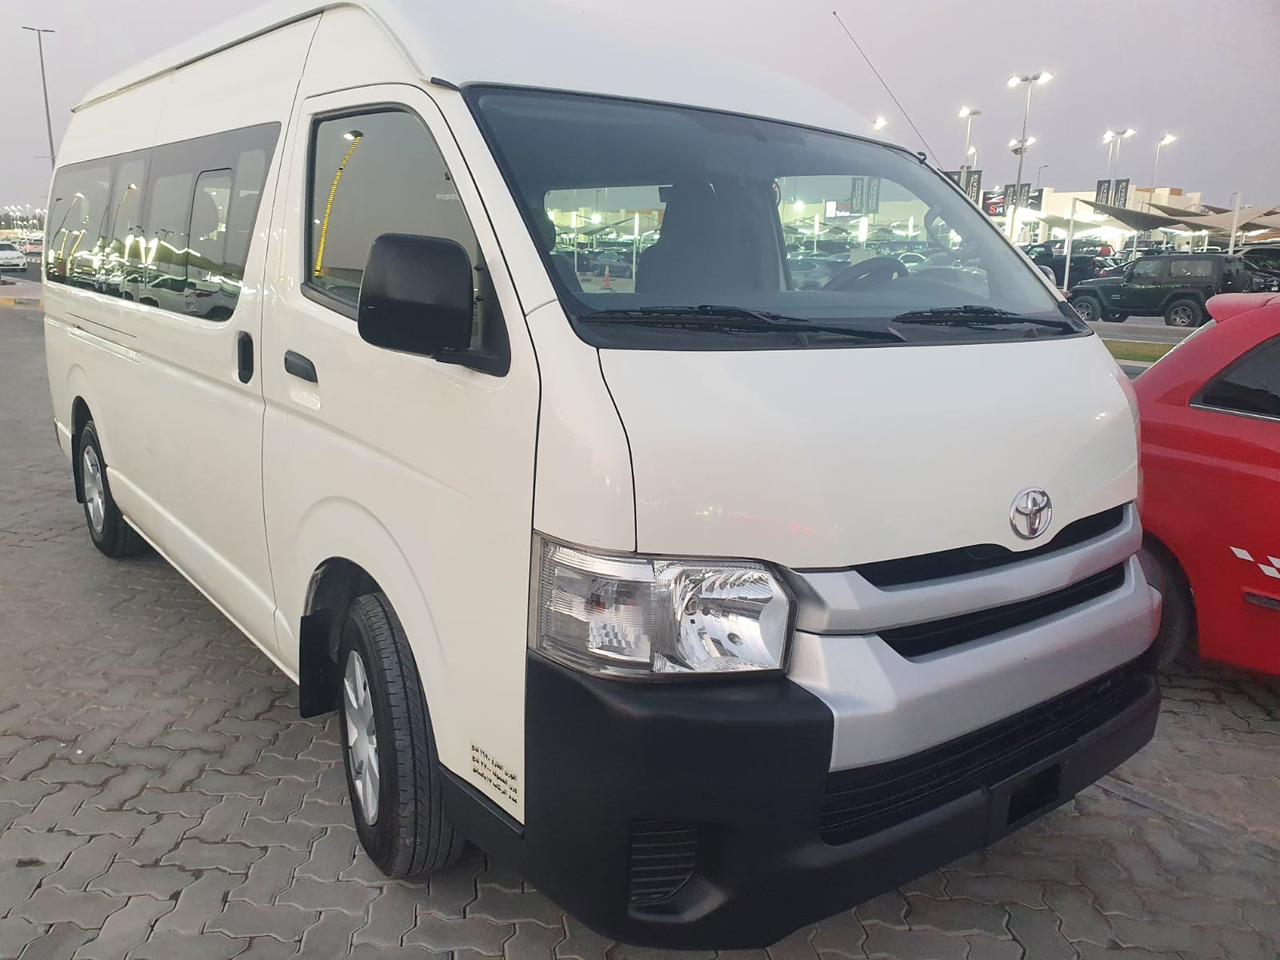 Leje en TOYOTA Hiace ... High Roof - 16 places TOYOTA Hiace ... High Roof - 16 places: billede 1